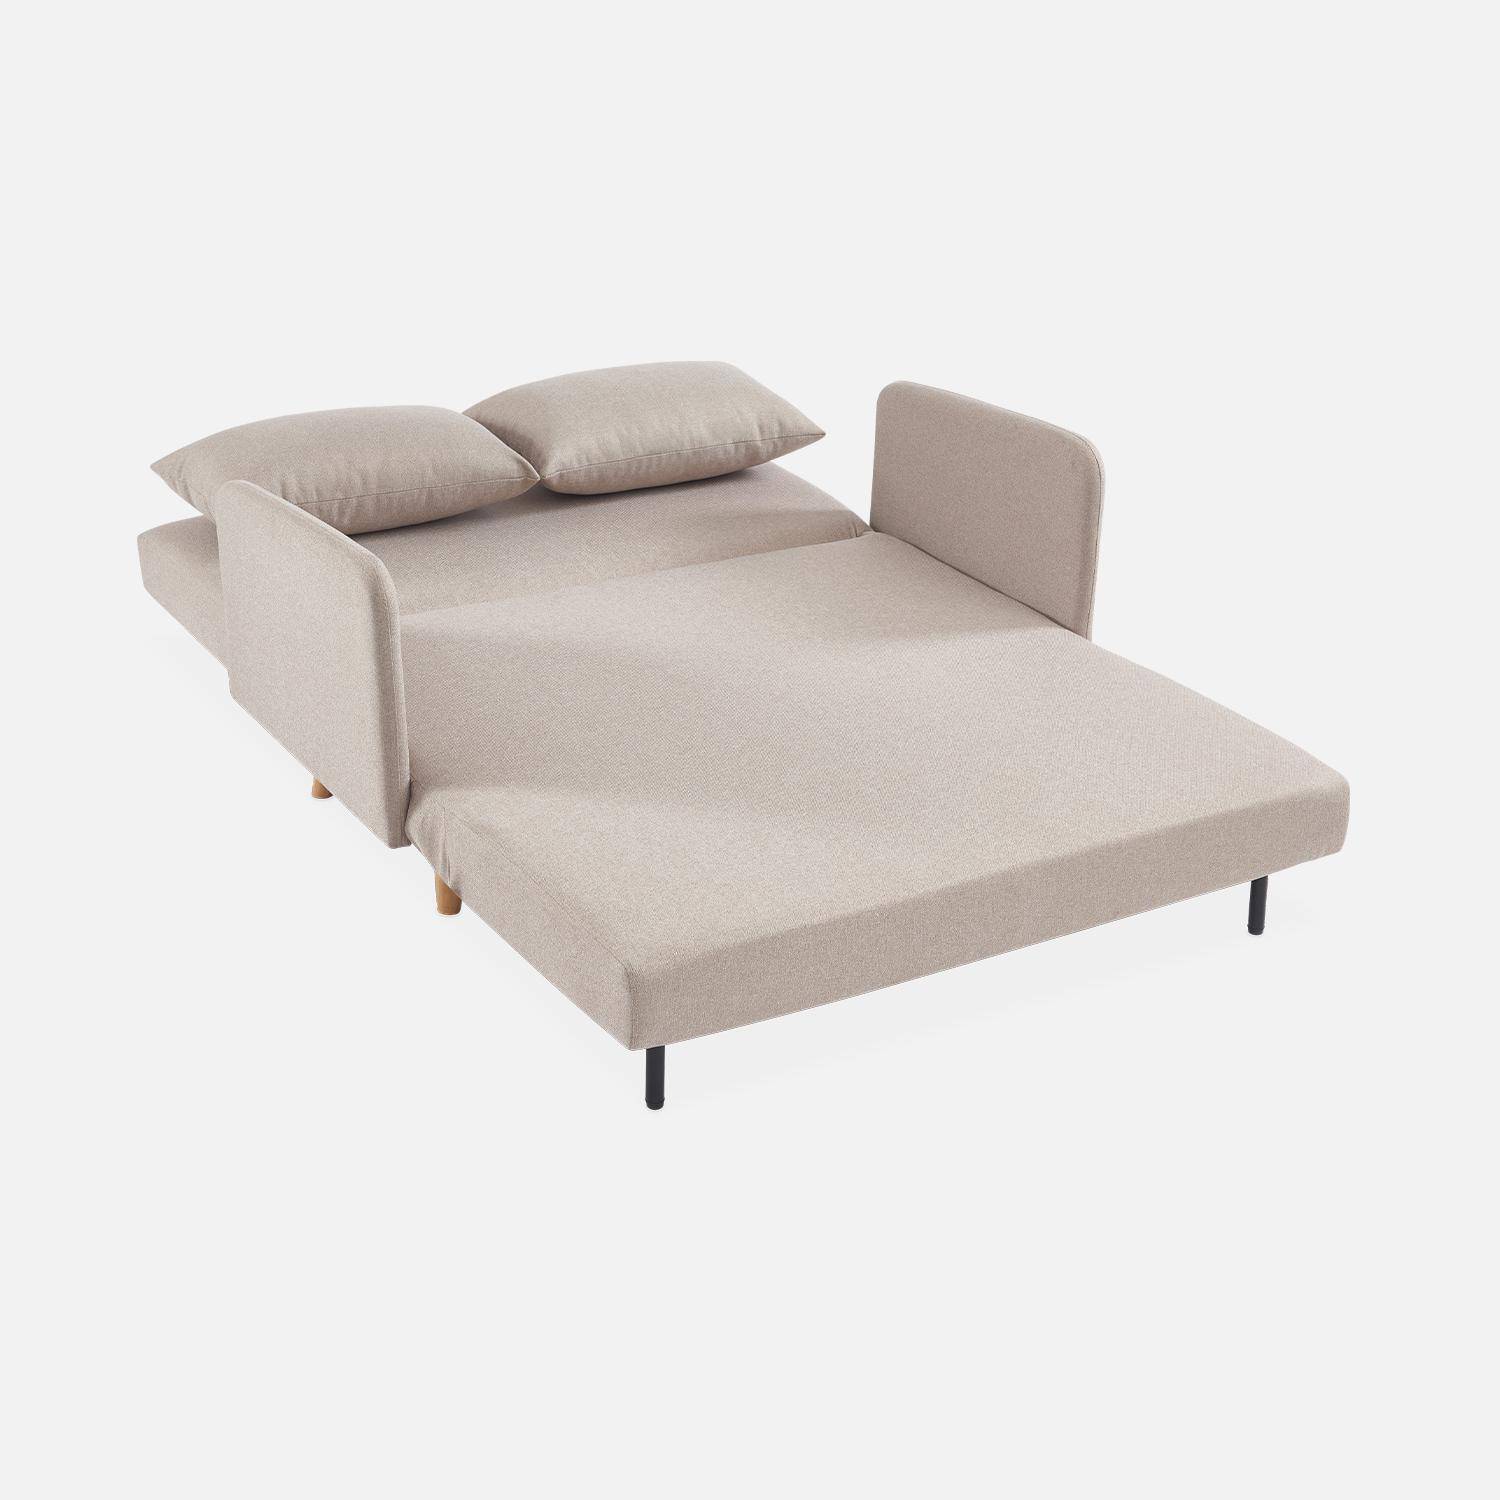 Sleeper, 2-Seater convertible sofa with wooden legs, L130xl81xH82cm, beige Photo7